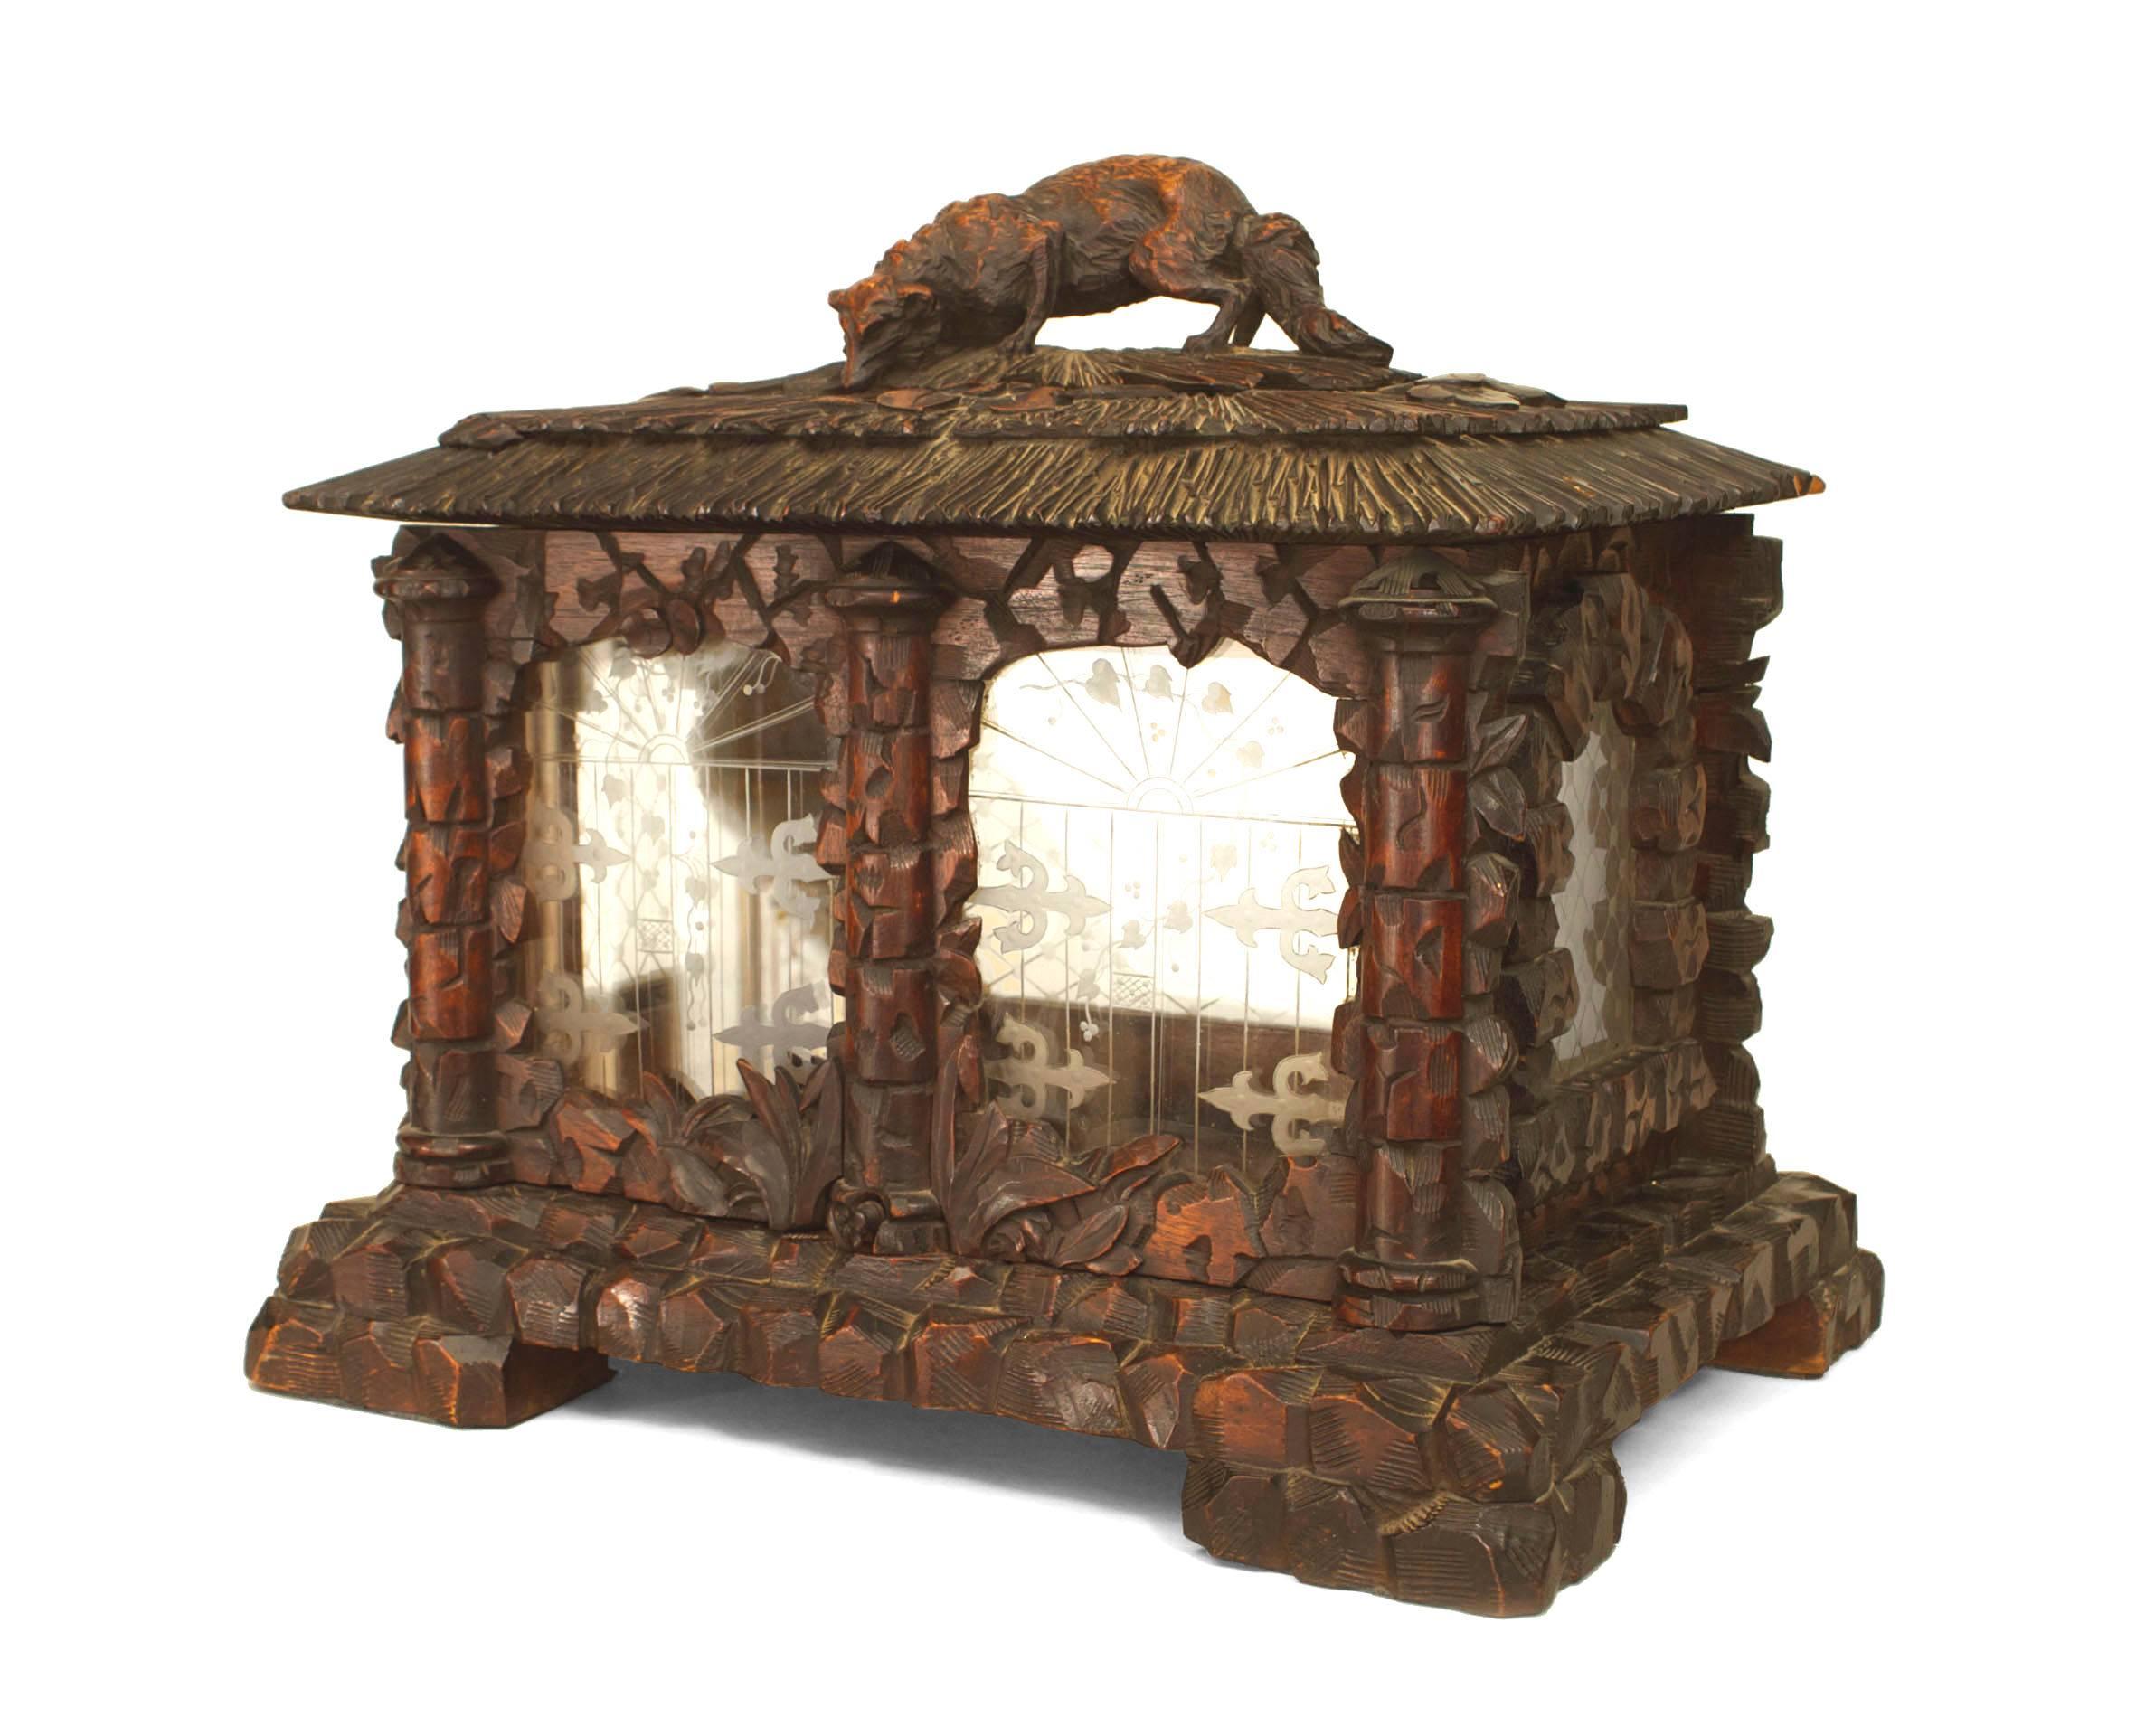 Rustic Black Forest (4th Quarter 19th Century) walnut carved table top display cabinet box with etched glass inset panels and floral carving with a top having a carved figure of a fox.
